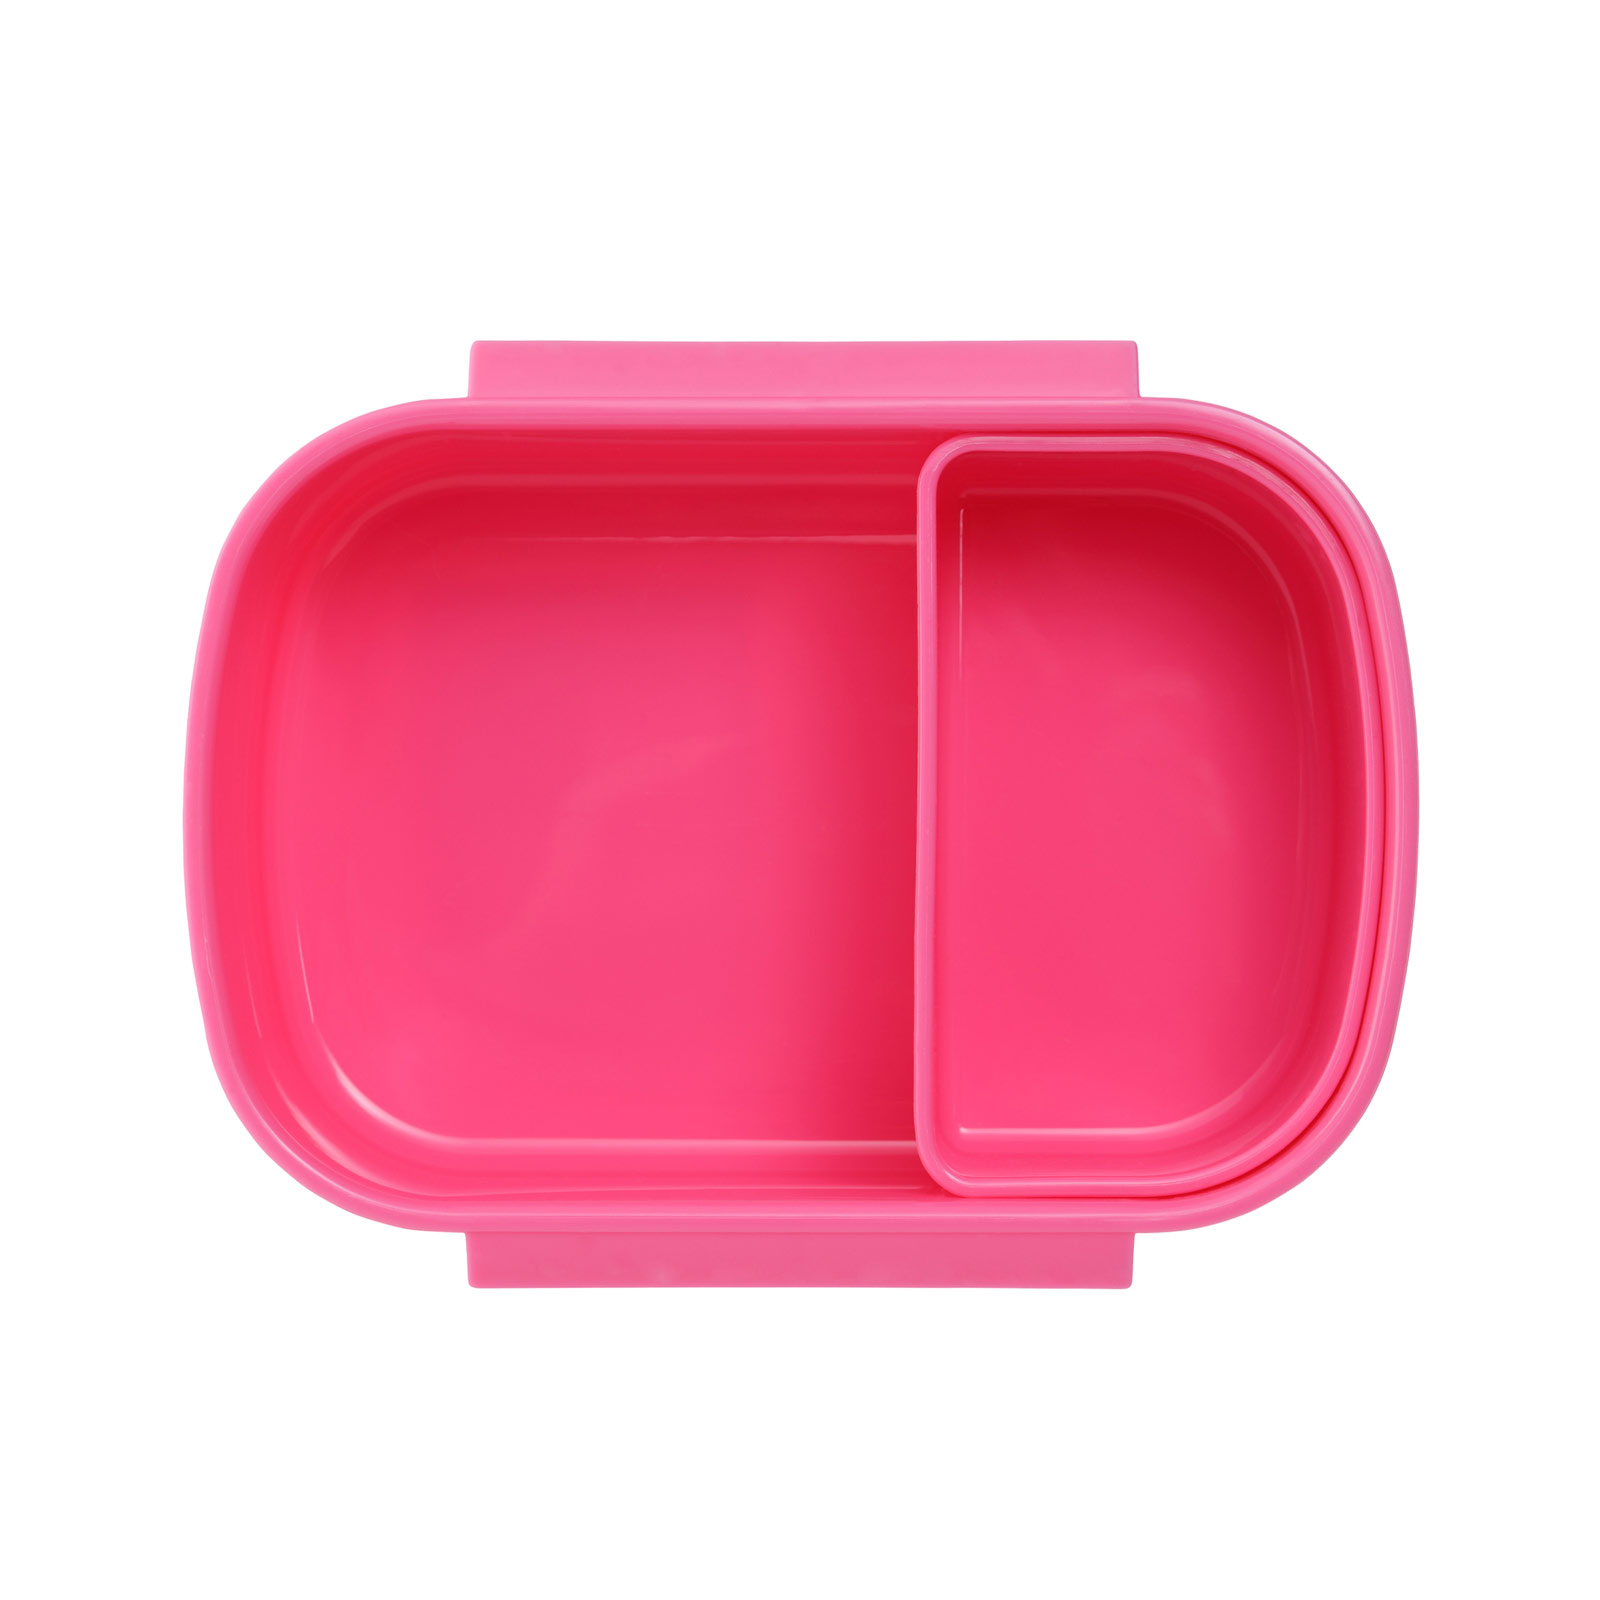 Sigikid Kinder Lunchset Pinky Queeny Prinzessin 2-teilig - A 